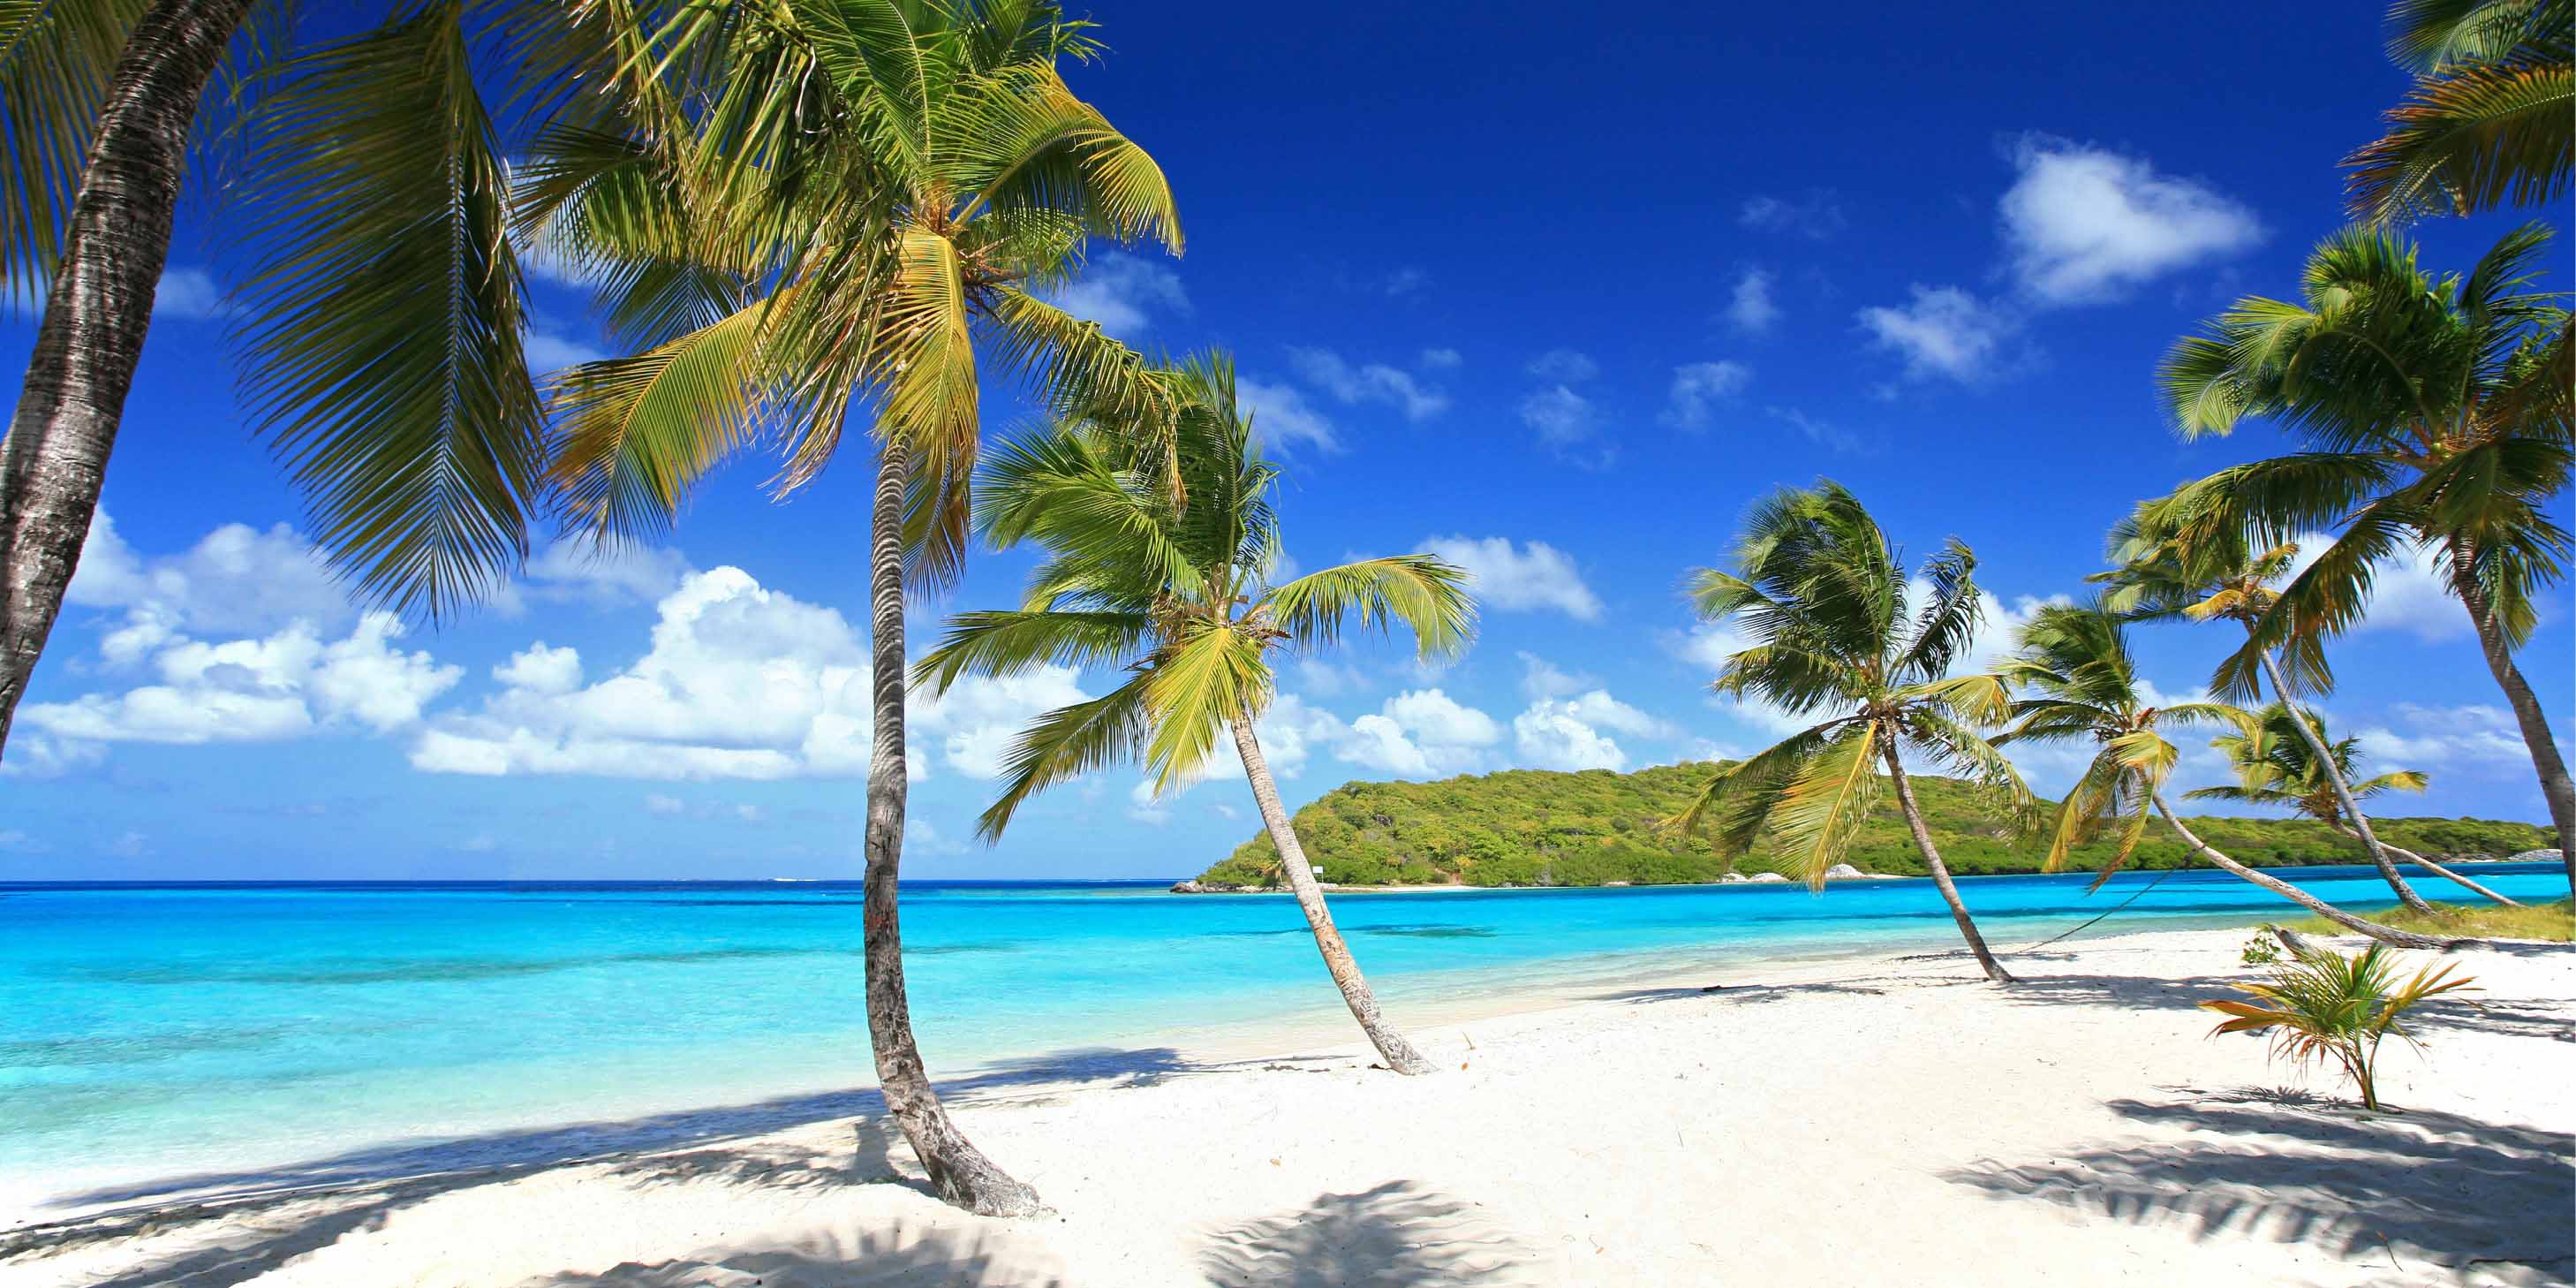 Palm trees blowing in the wind against the blue sky, dotted along the pristine white beaches at Tobago Cays, Grenadines